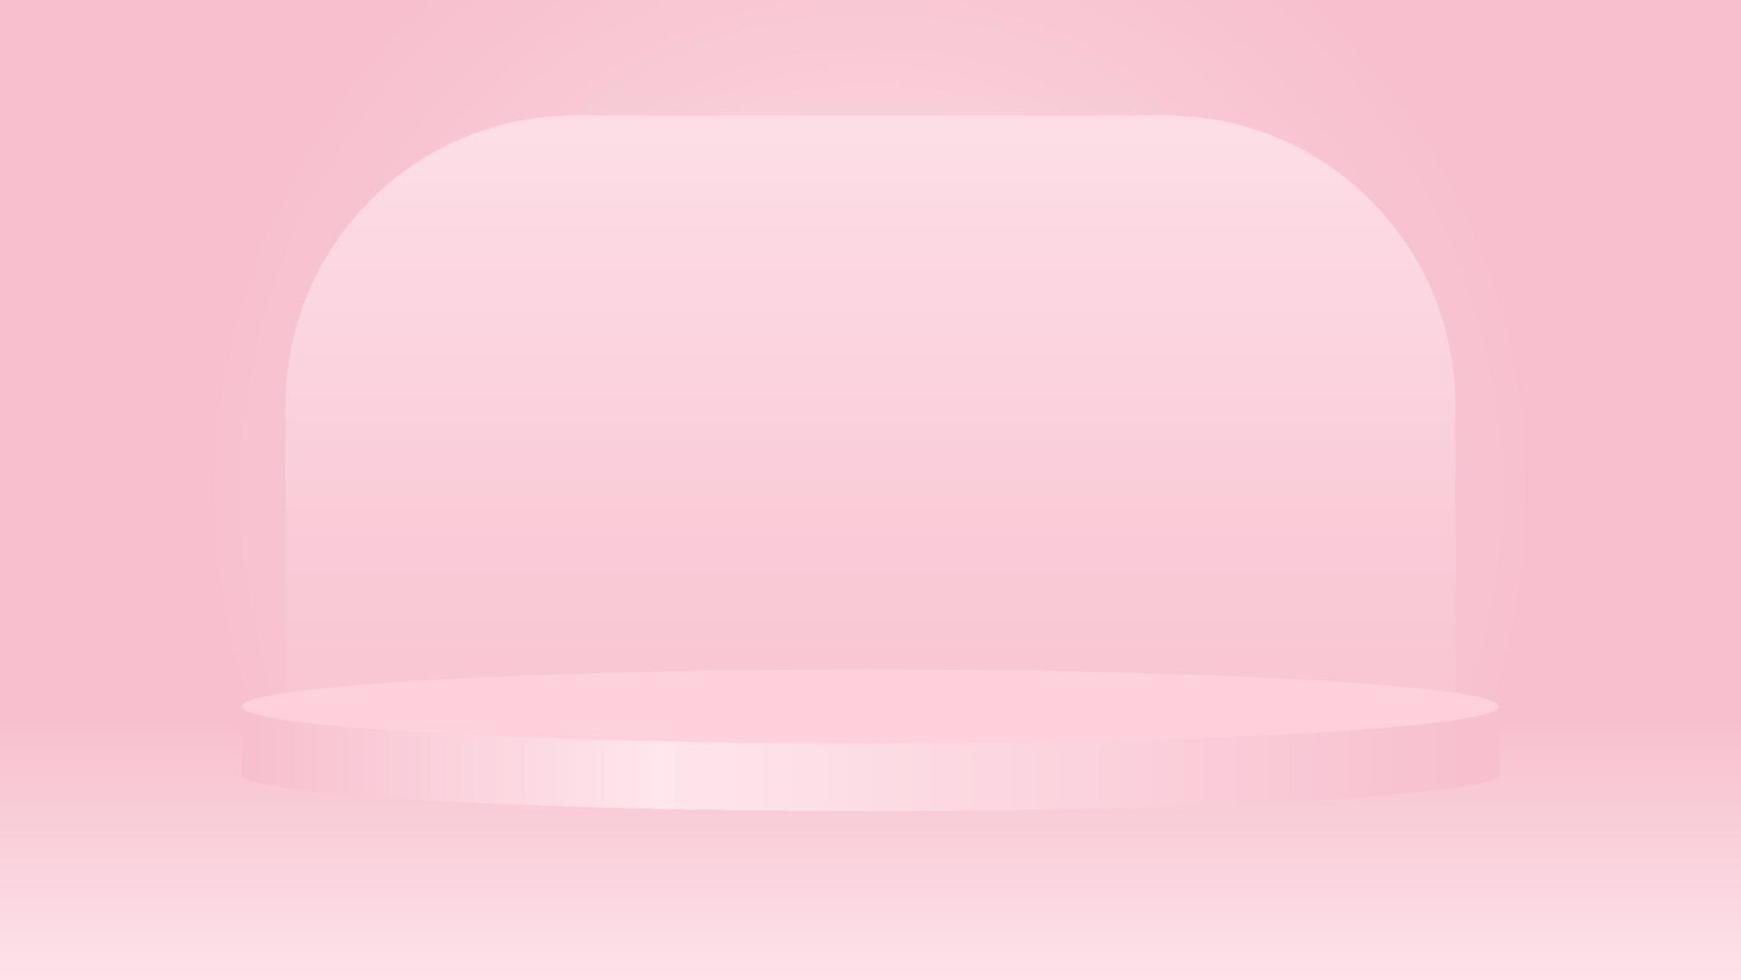 blank pink podium for outstanding luxury product advertising display on pink background vector